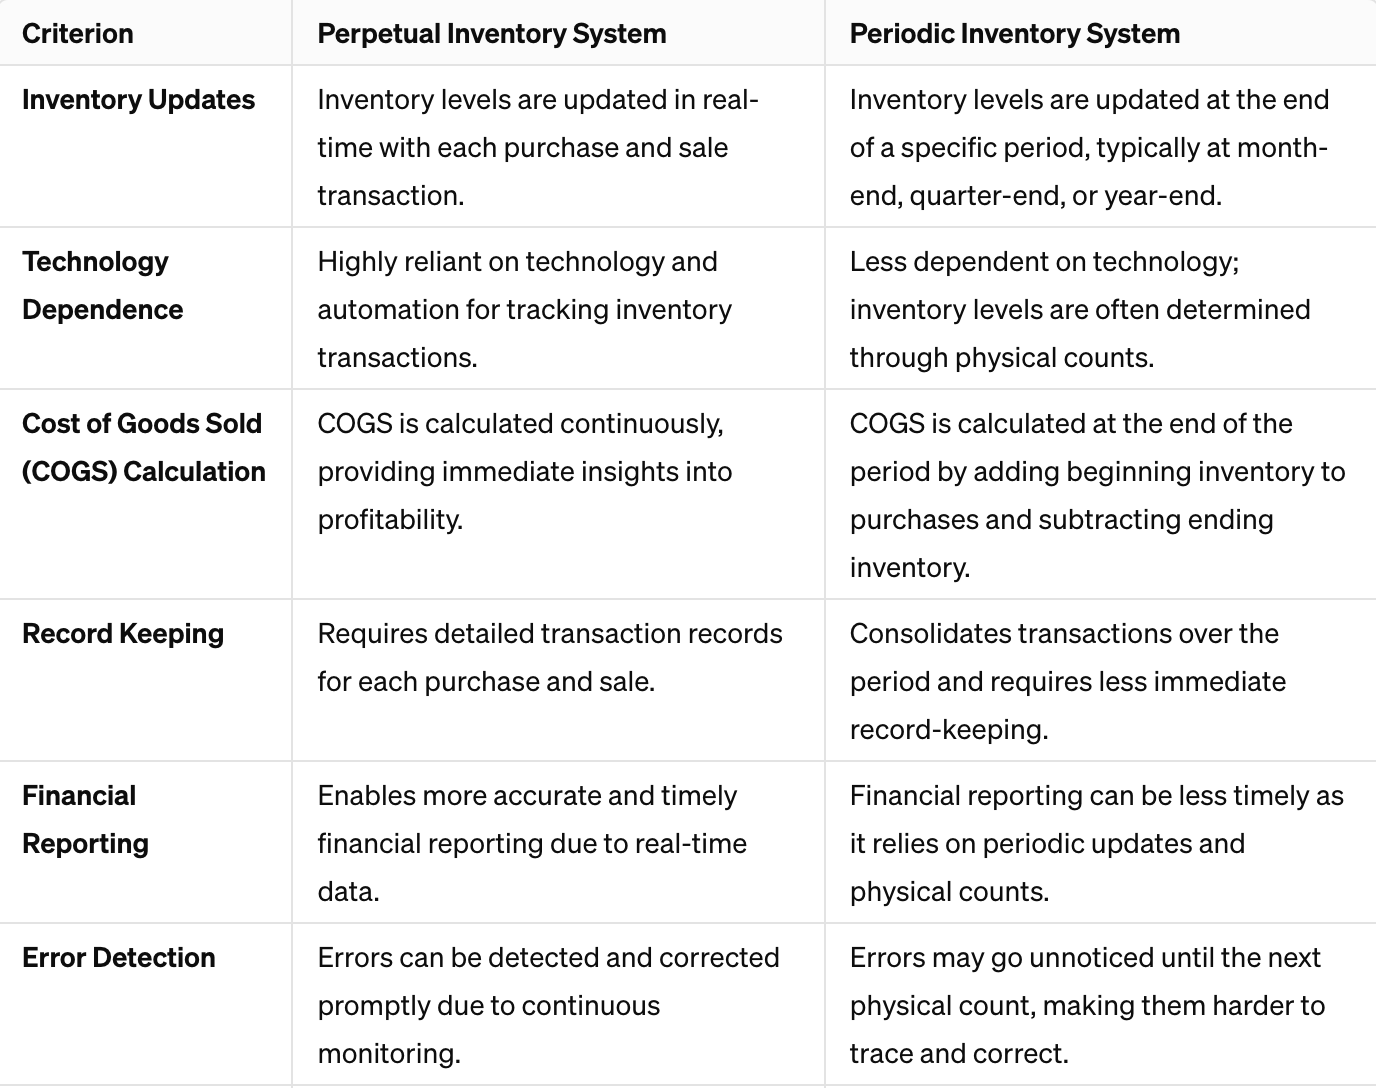 Difference between Perpetual and Periodic Inventory Systems